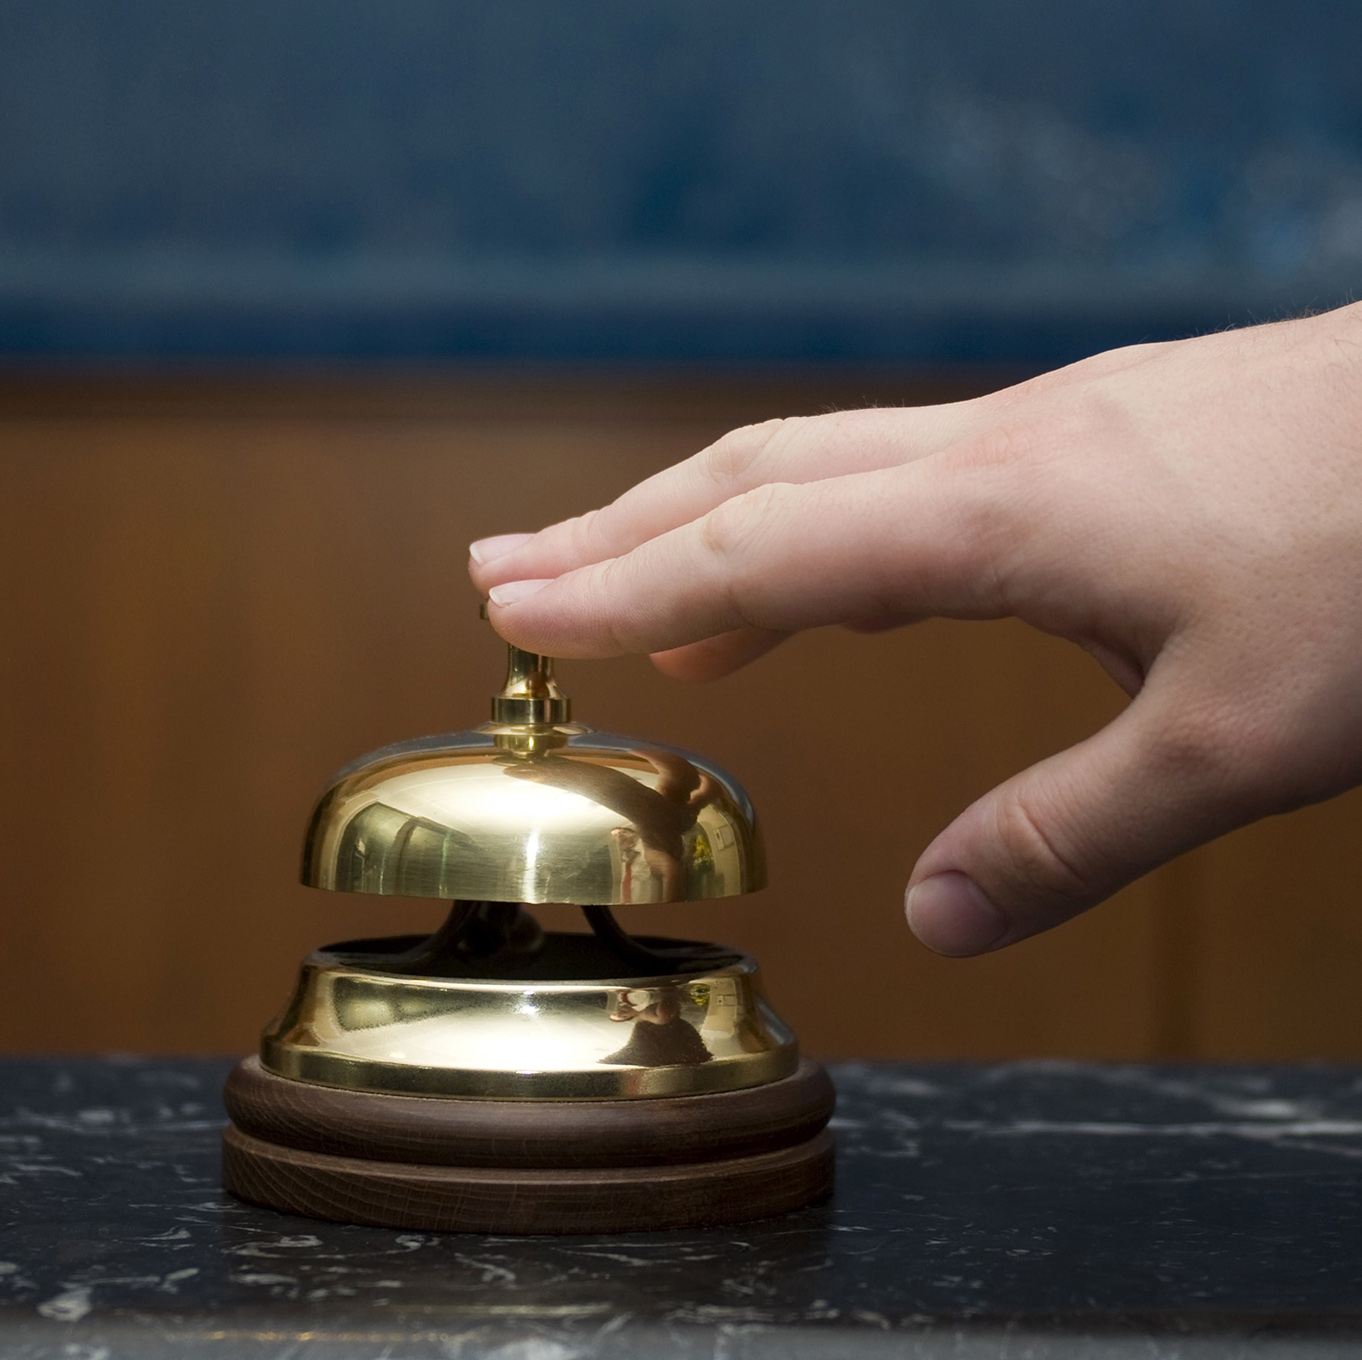 A hand reaches out to ring a service bell on a desk